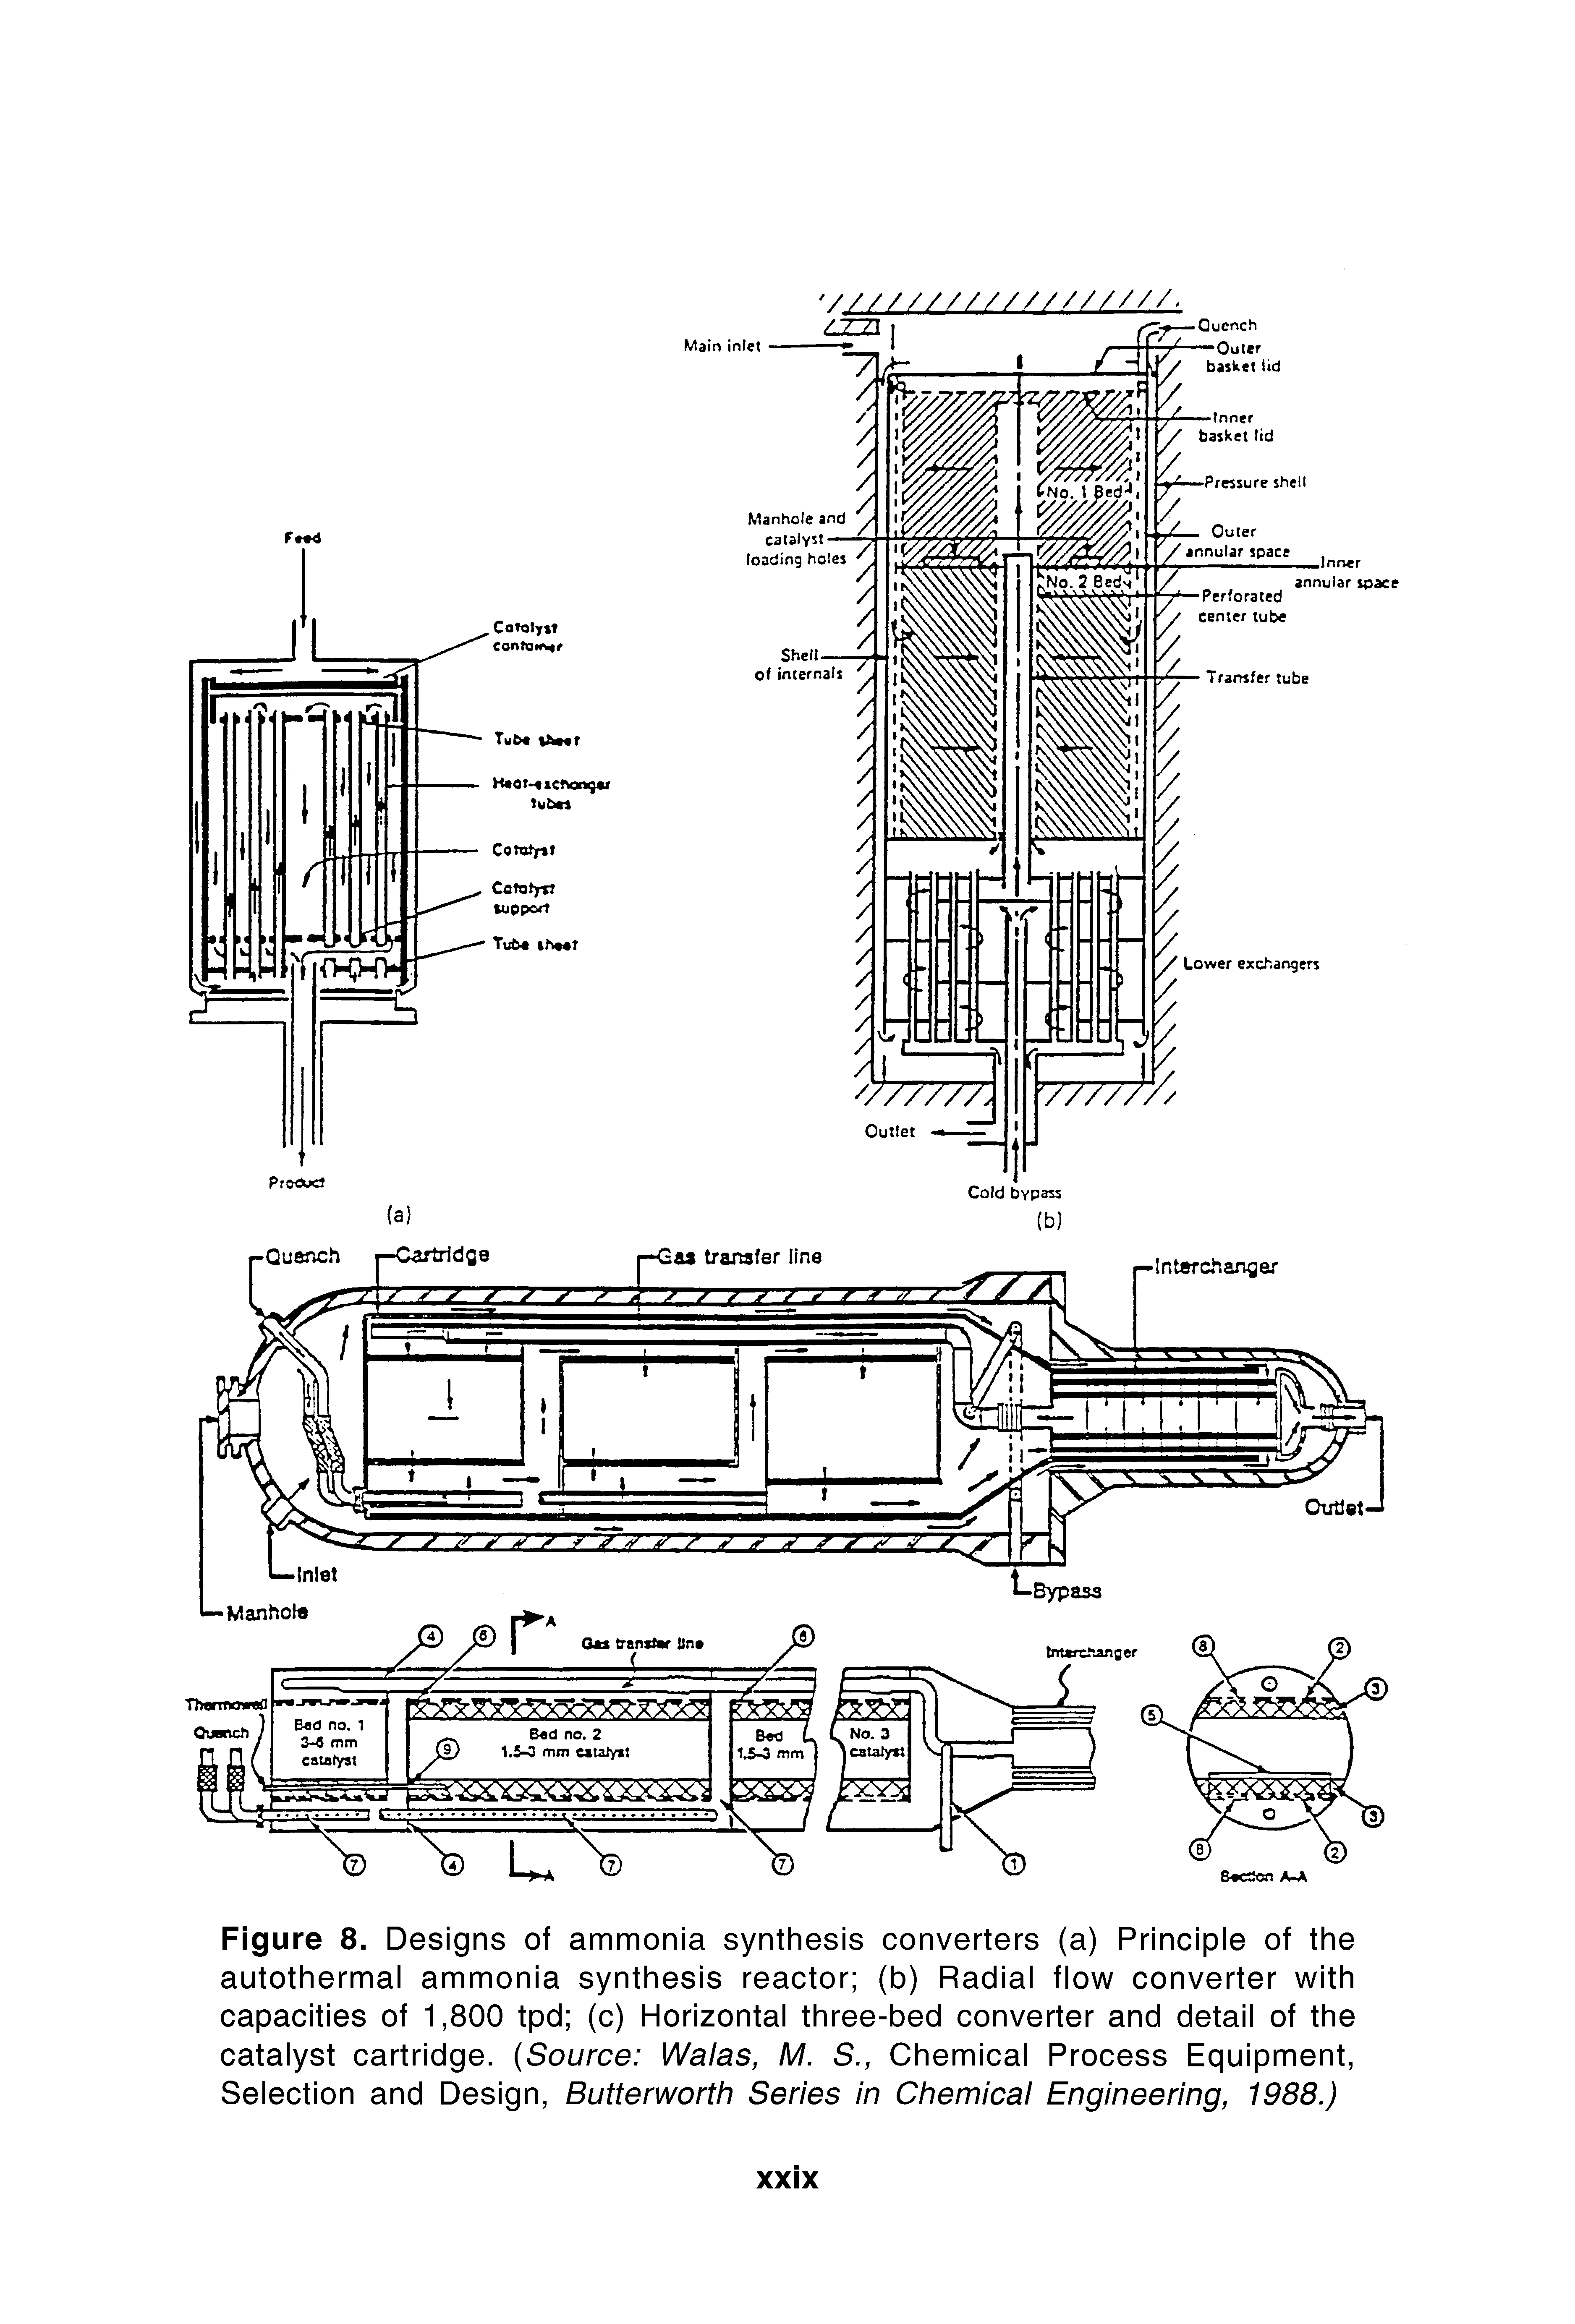 Figure 8. Designs of ammonia synthesis converters (a) Principle of the autothermal ammonia synthesis reactor (b) Radial flow converter with capacities of 1,800 tpd (c) Horizontal three-bed converter and detail of the catalyst cartridge. (Source Walas, M. S., Chemical Process Equipment, Selection and Design, Butterworth Series in Chemical Engineering, 1988.)...